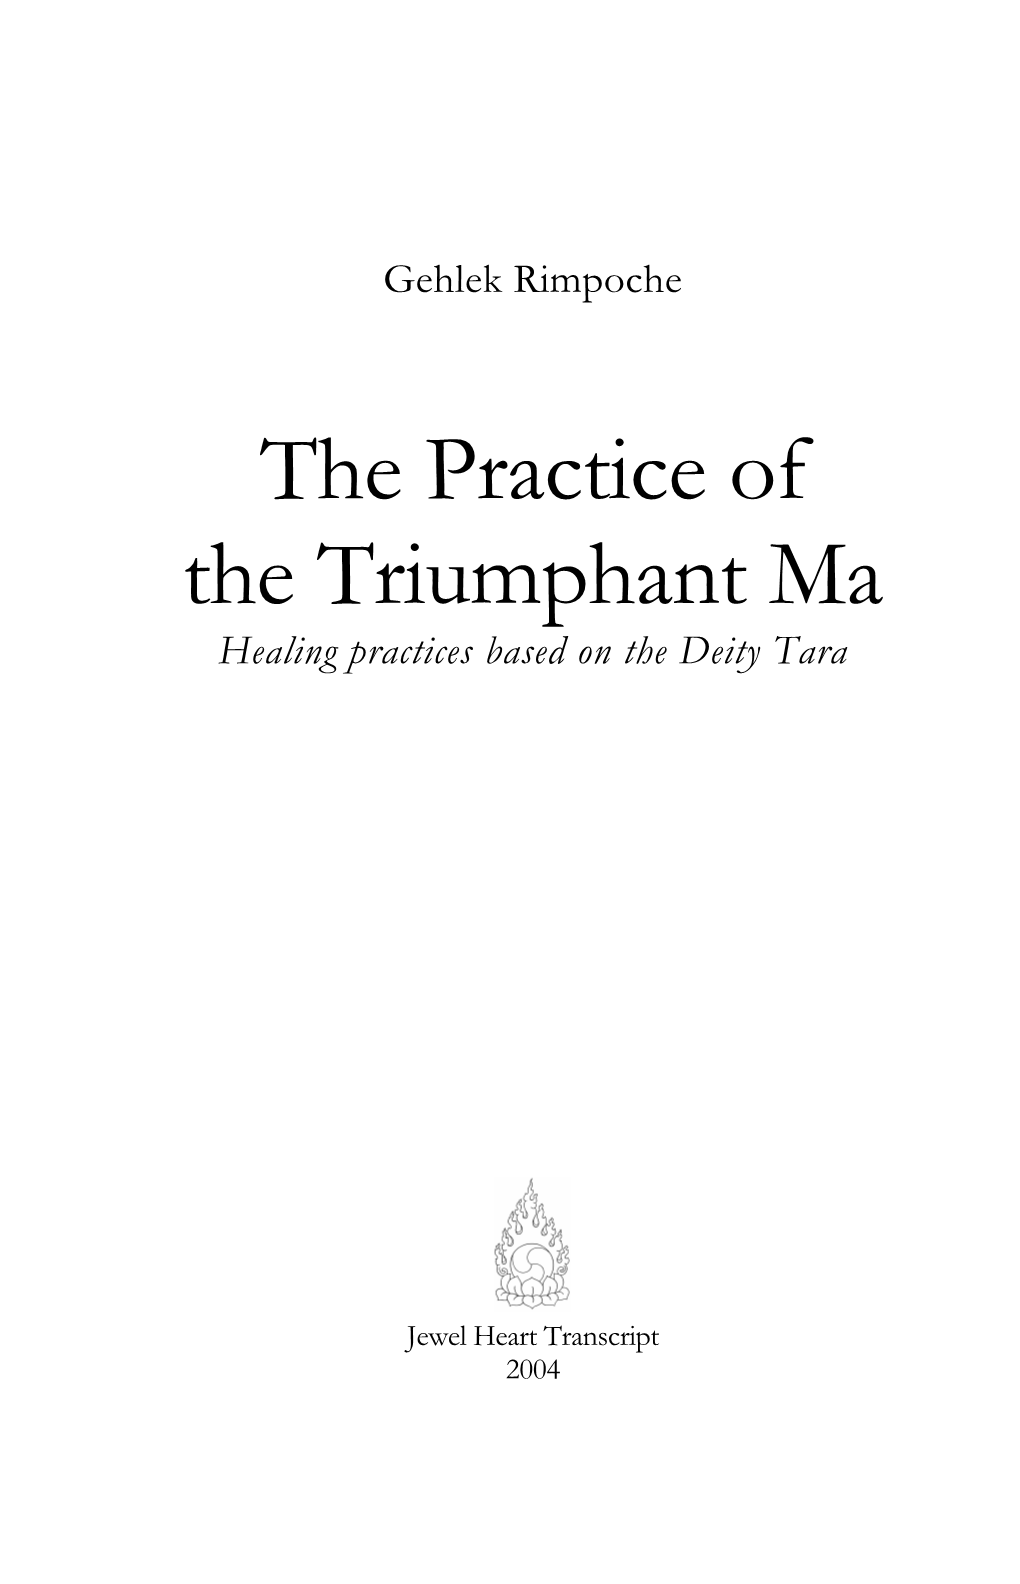 The Practice of the Triumphant Ma Healing Practices Based on the Deity Tara